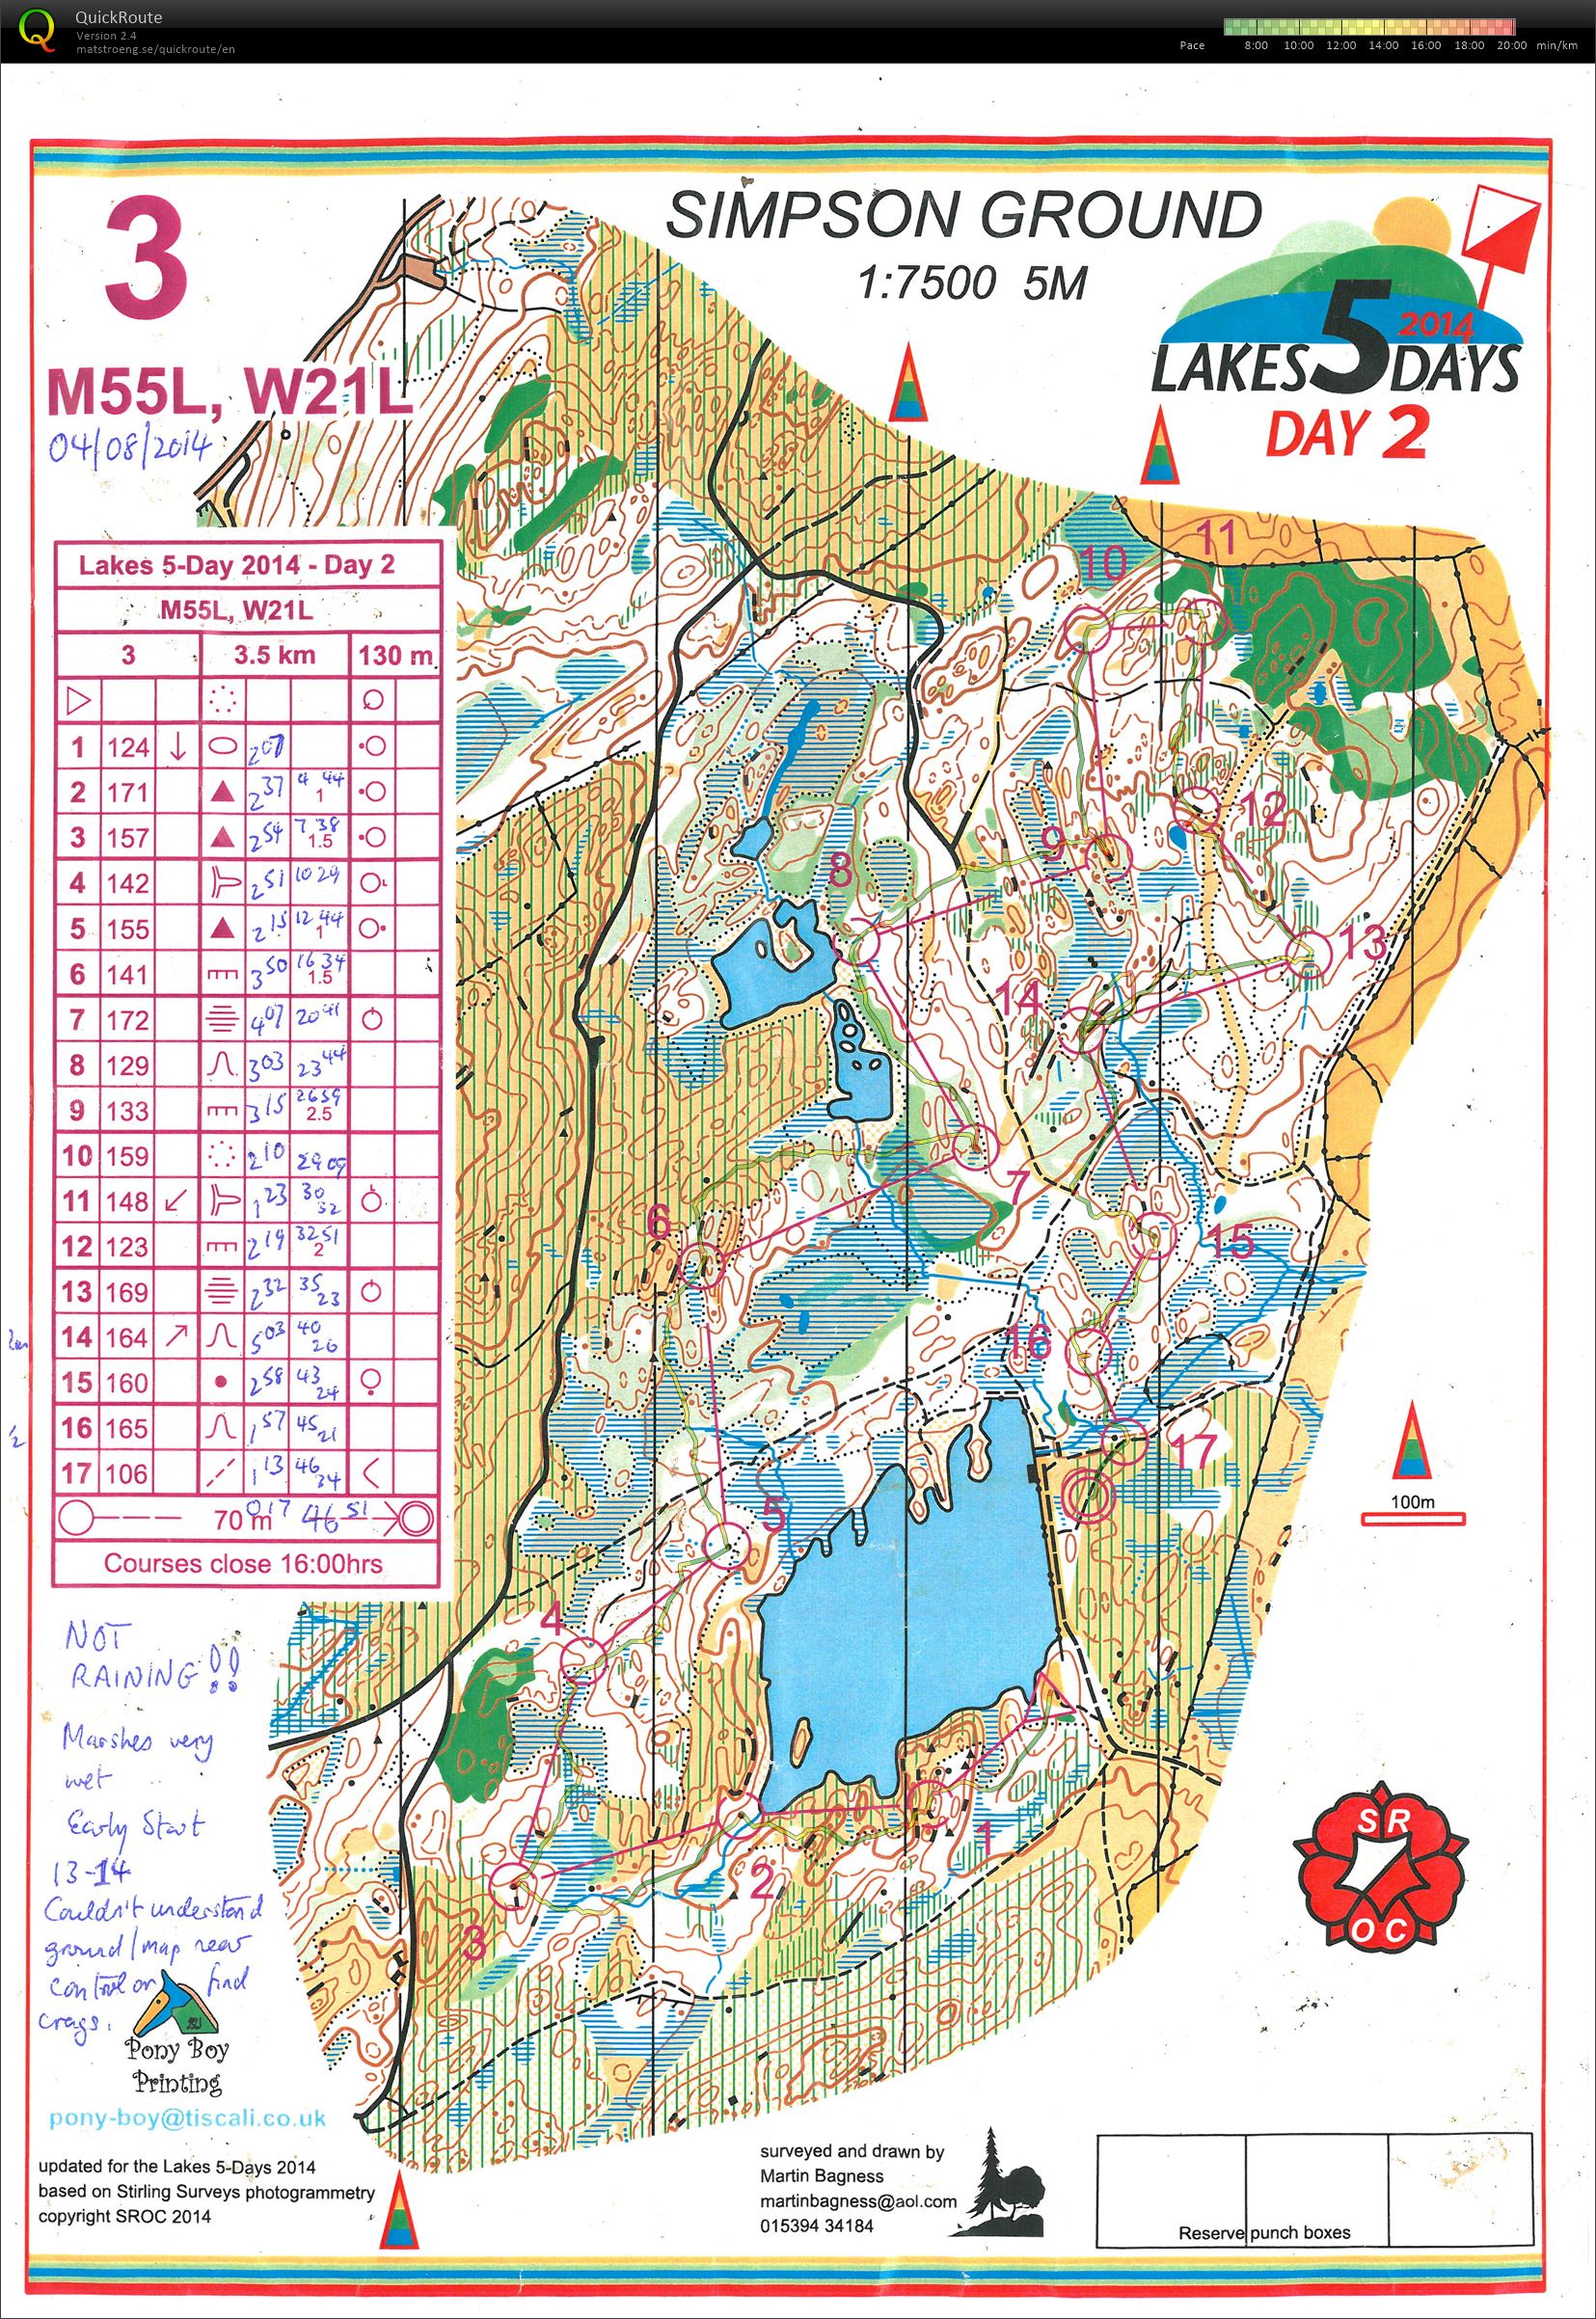 Lakes 5 days - Day 2 H55 (04/08/2014)